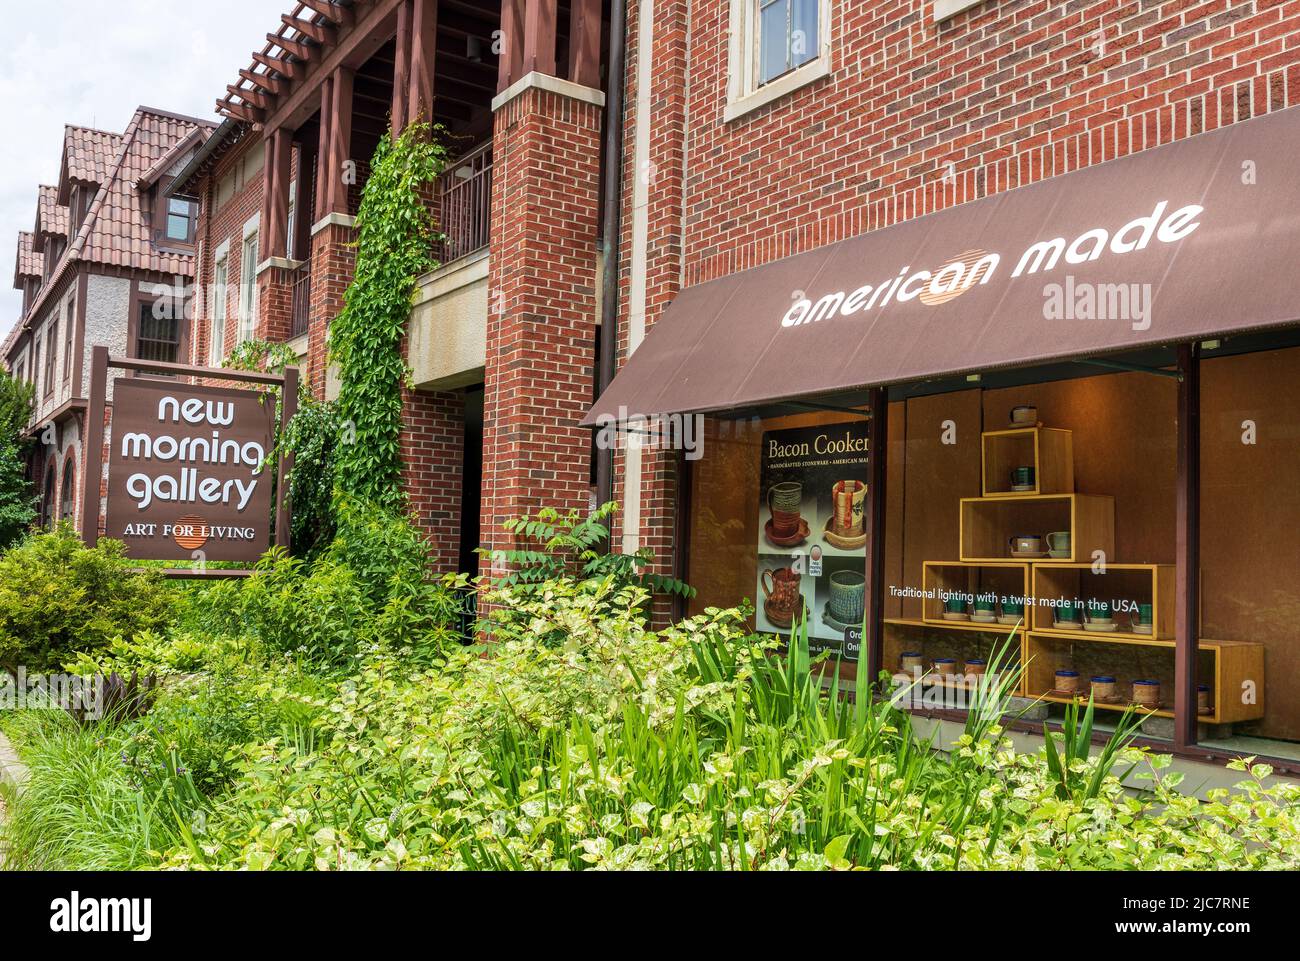 BILTMORE VILLAGE in ASHEVILLE, NC, USA-5 JUNE 2022: New Morning Gallery. Display window and monument sign.  Horizontal image Stock Photo